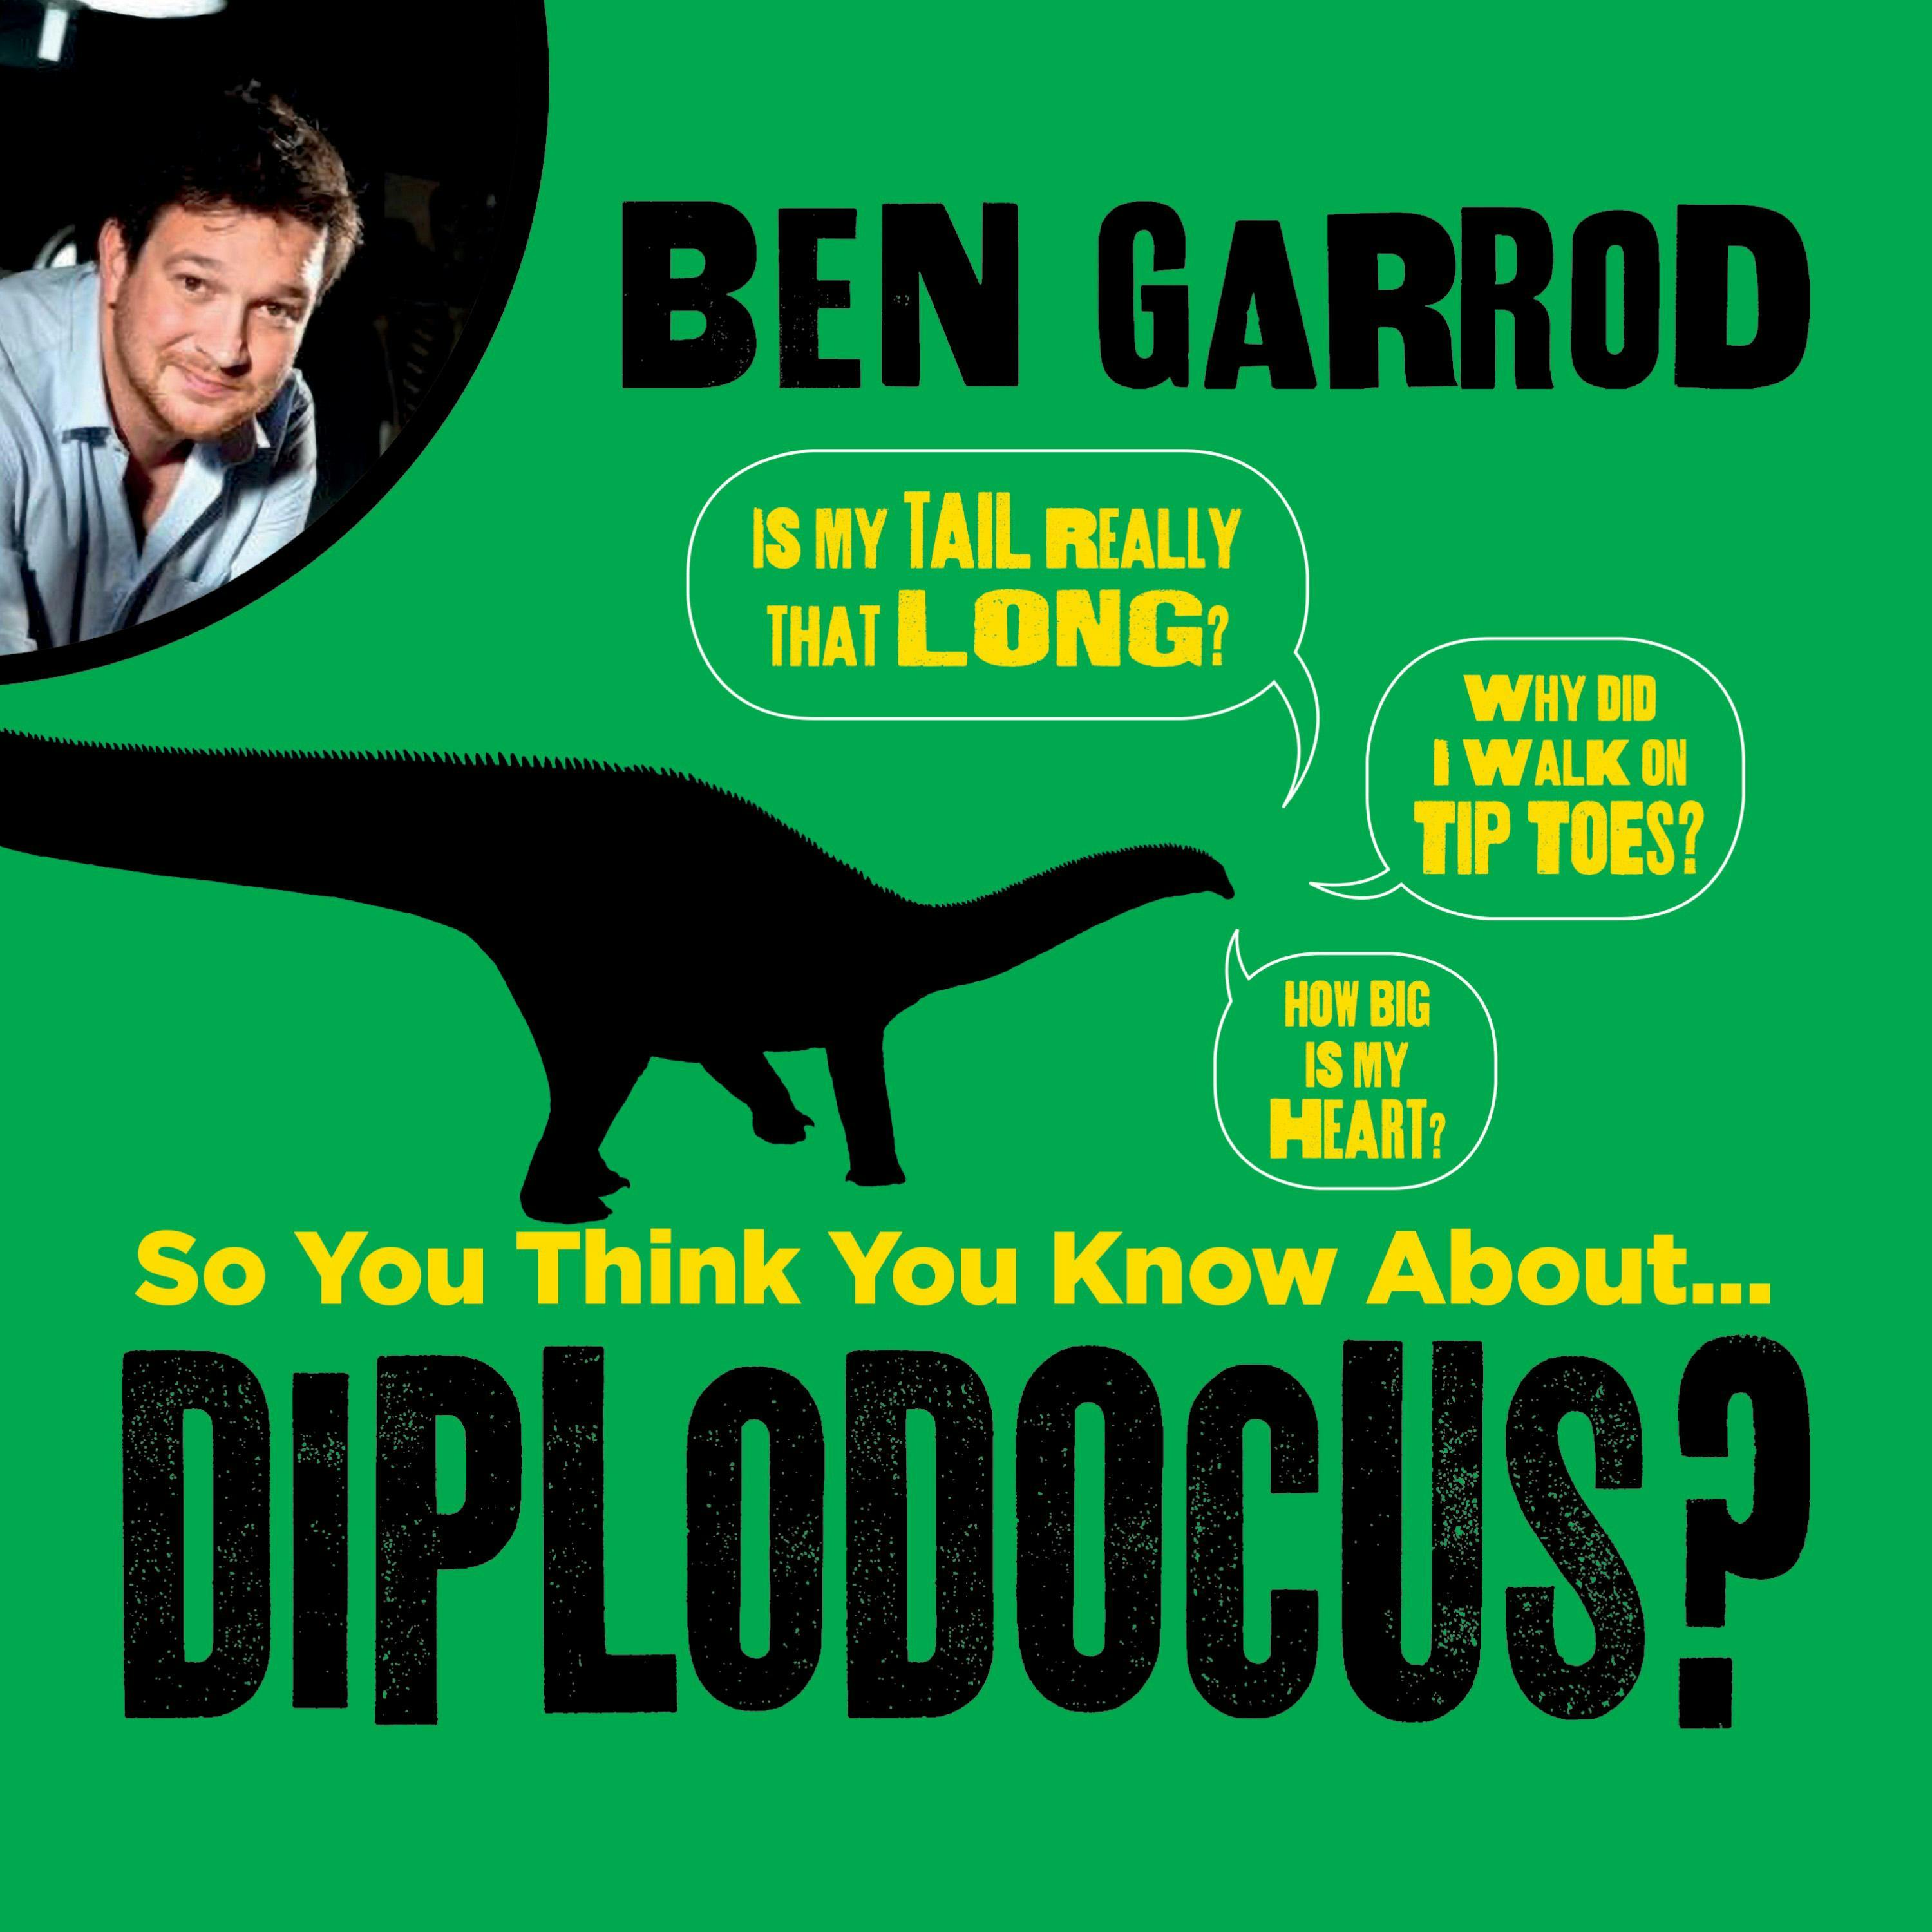 So You Think You Know About Diplodocus?: So You Think You Know About...Dinosaurs? - undefined